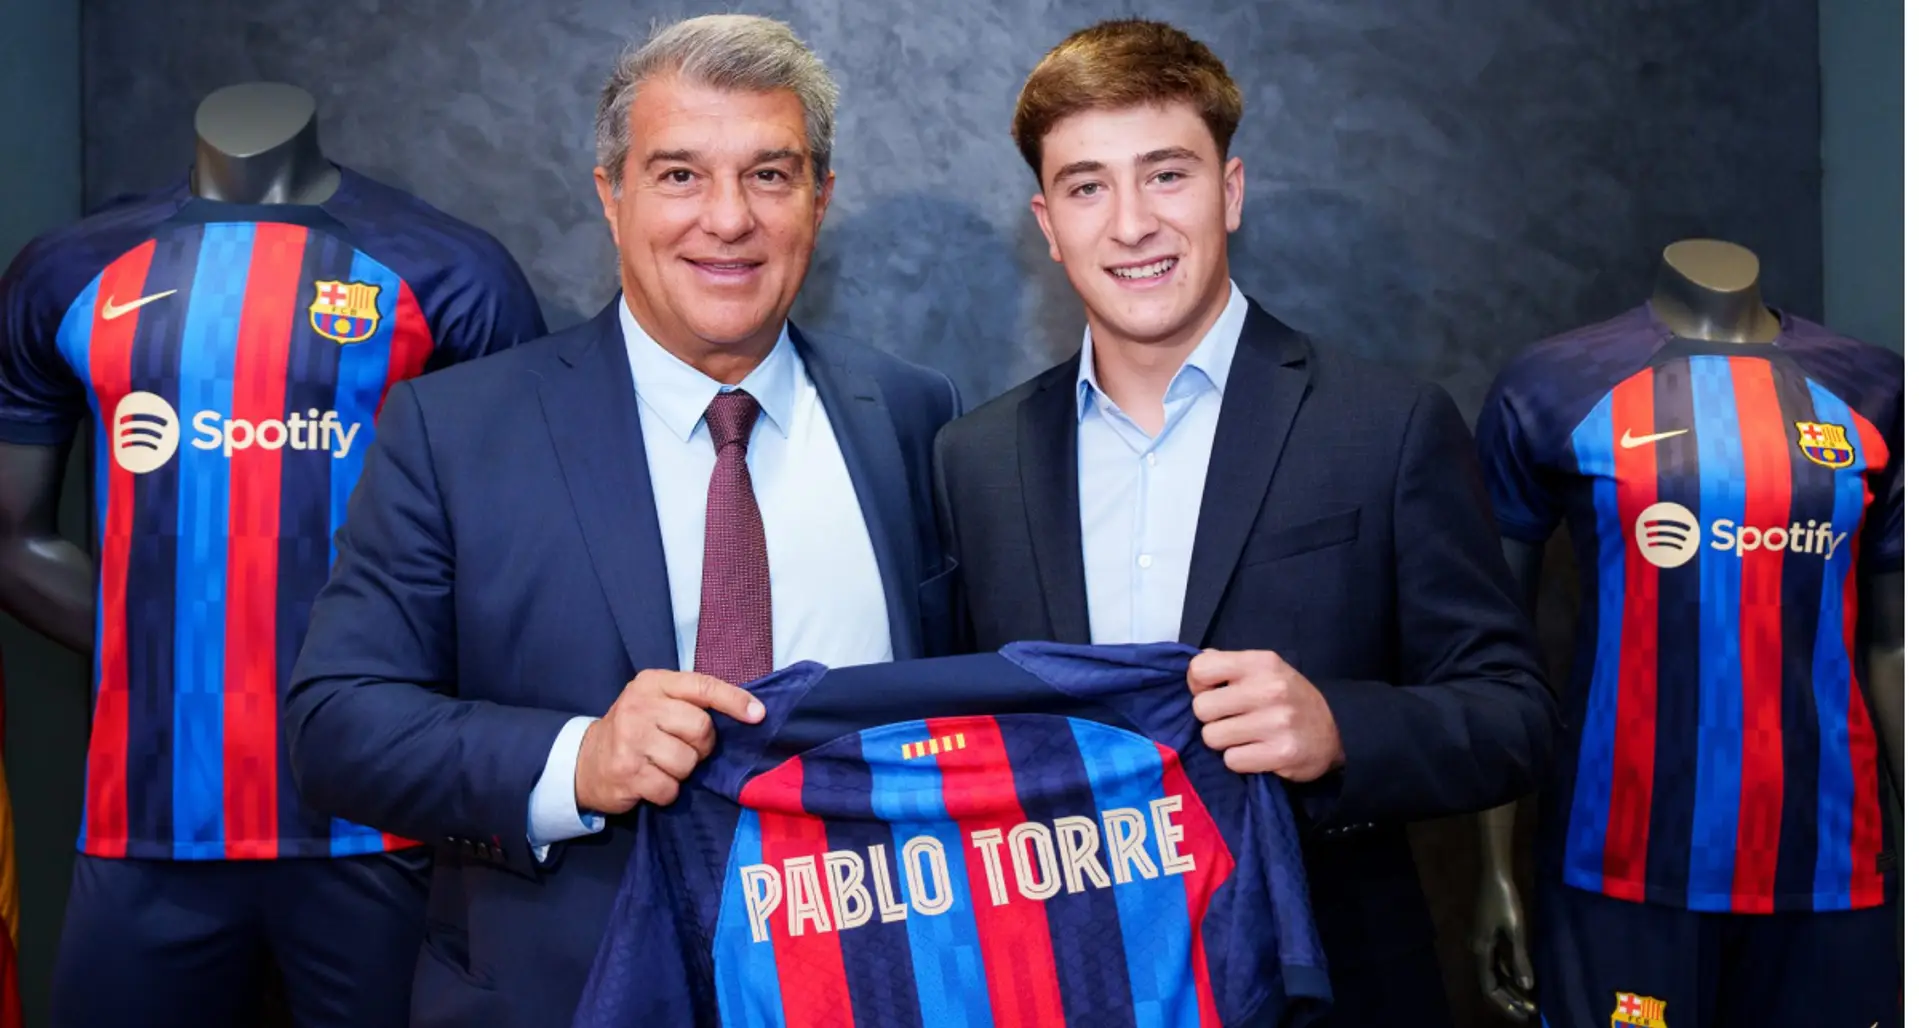 OFFICIAL: Barcelona unveil new signing Pablo Torre